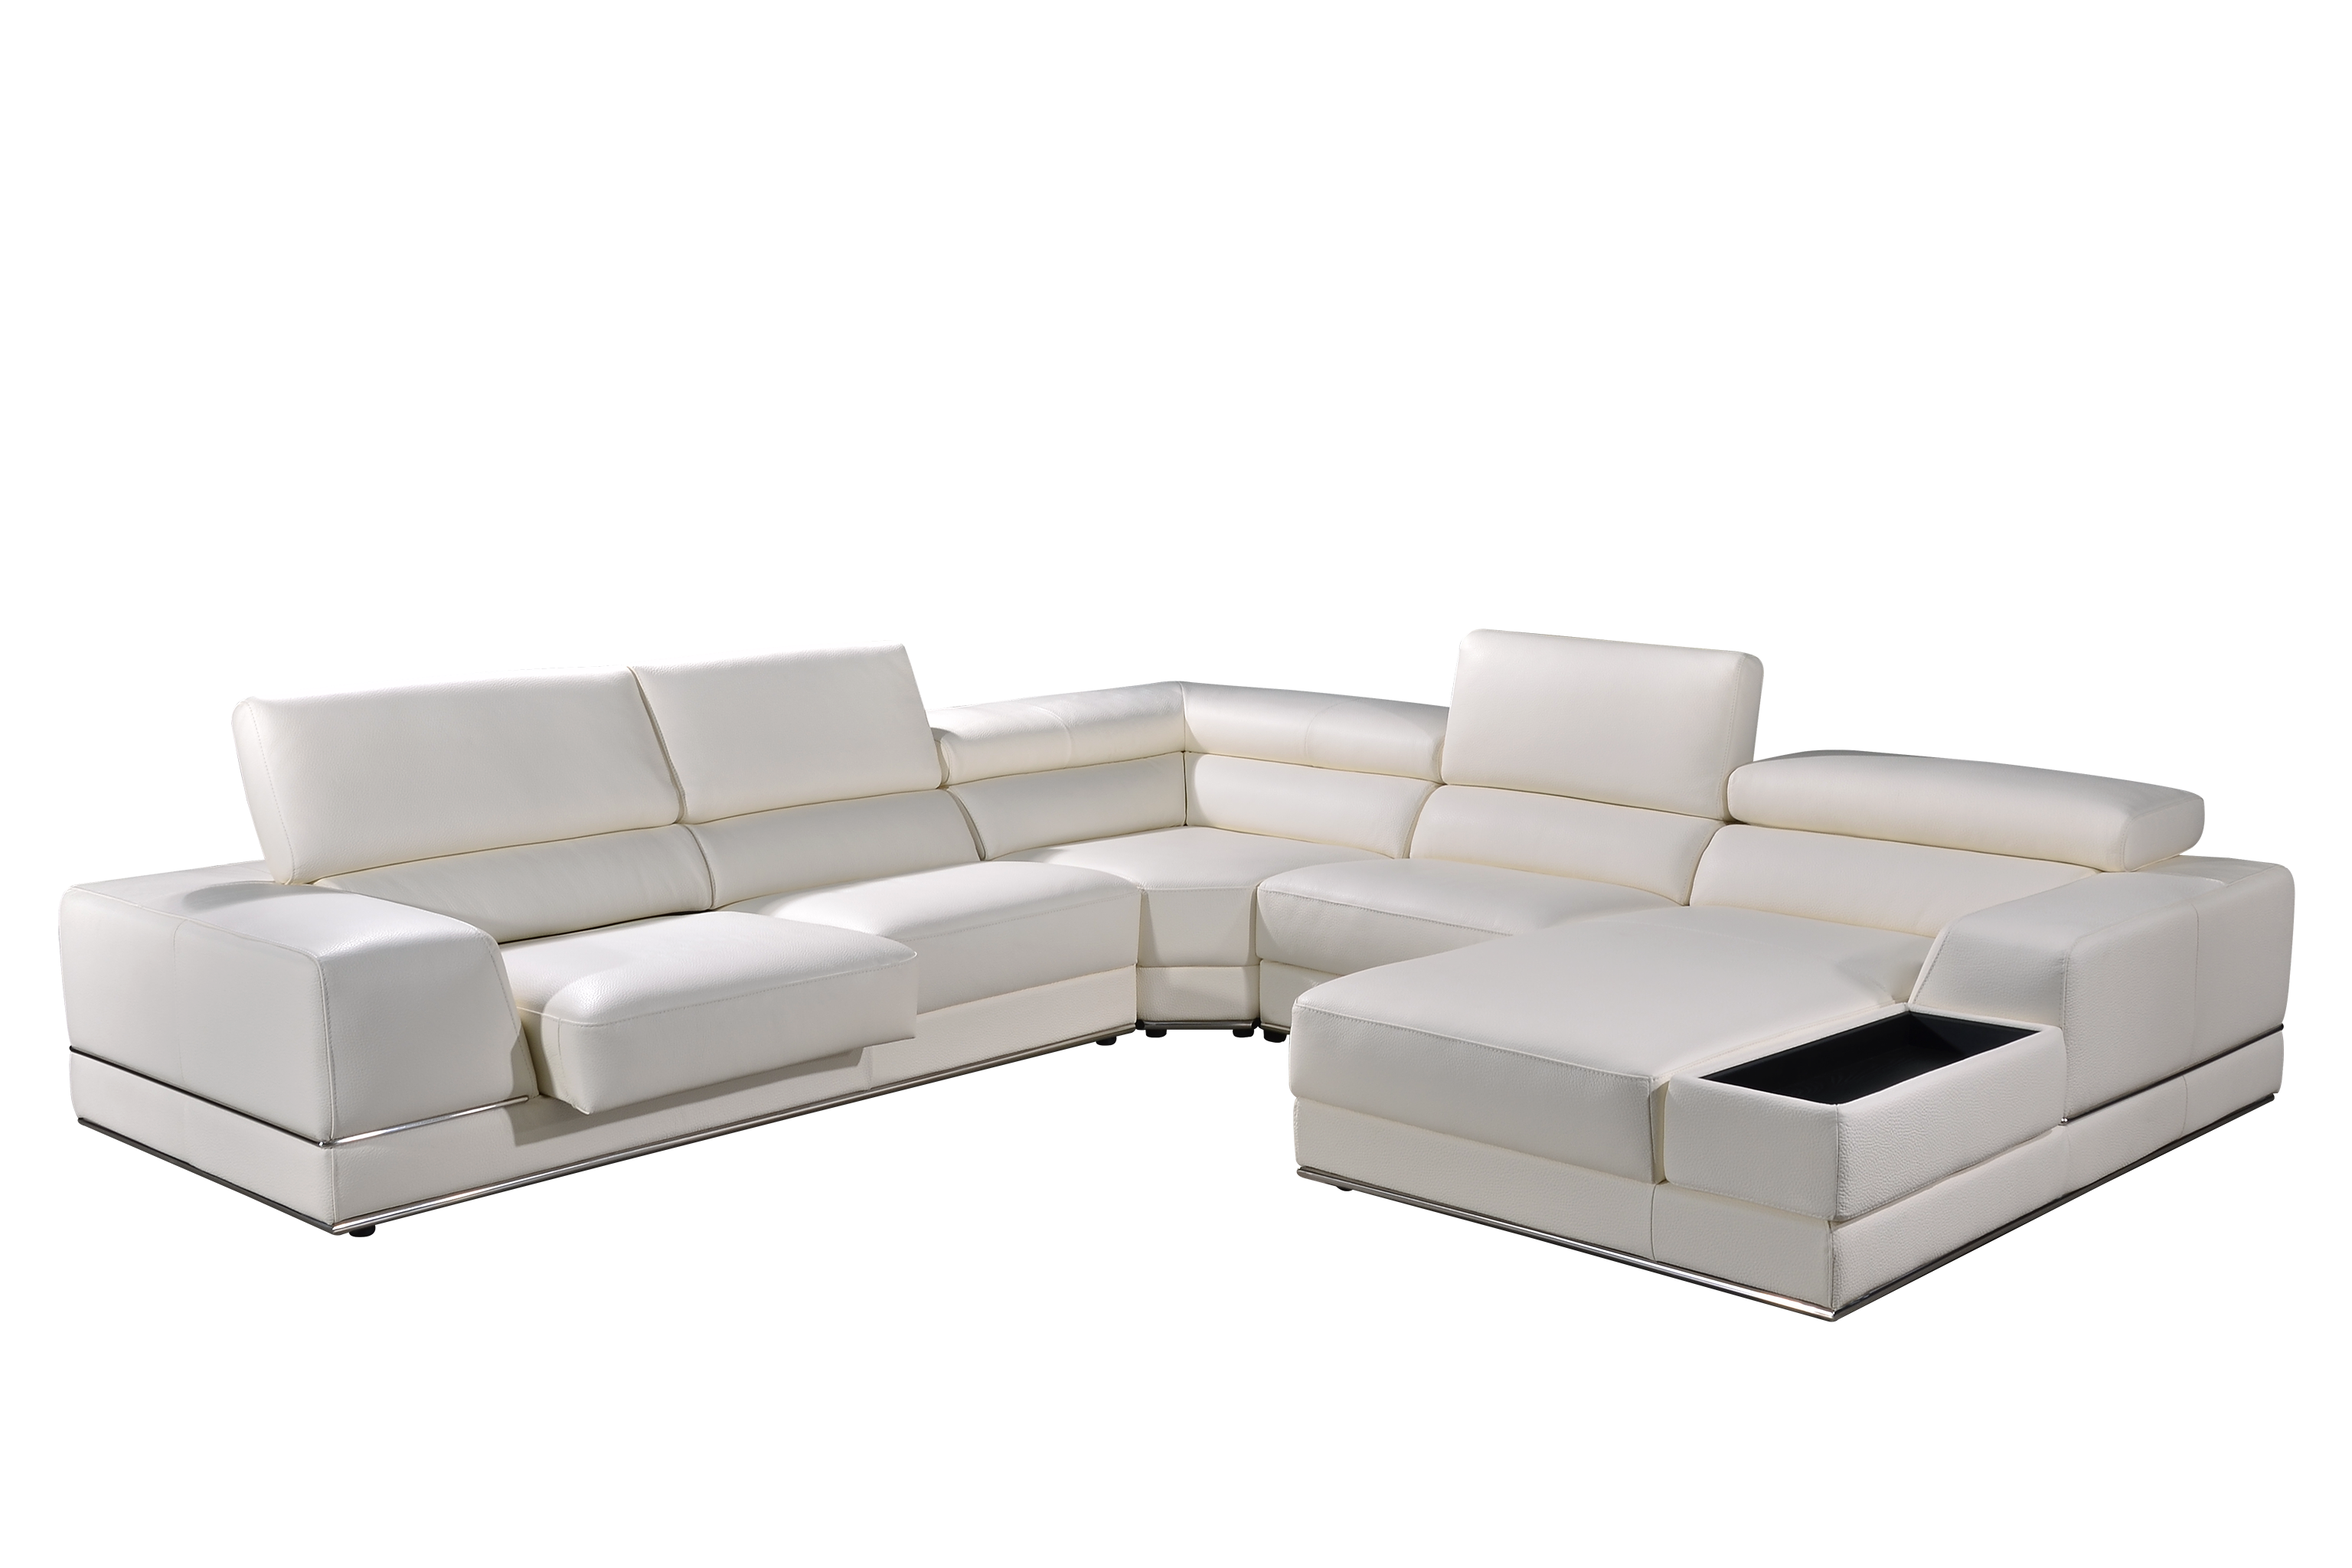 GIOVANNI Sectional Slider Sofa in Leather by Castilla